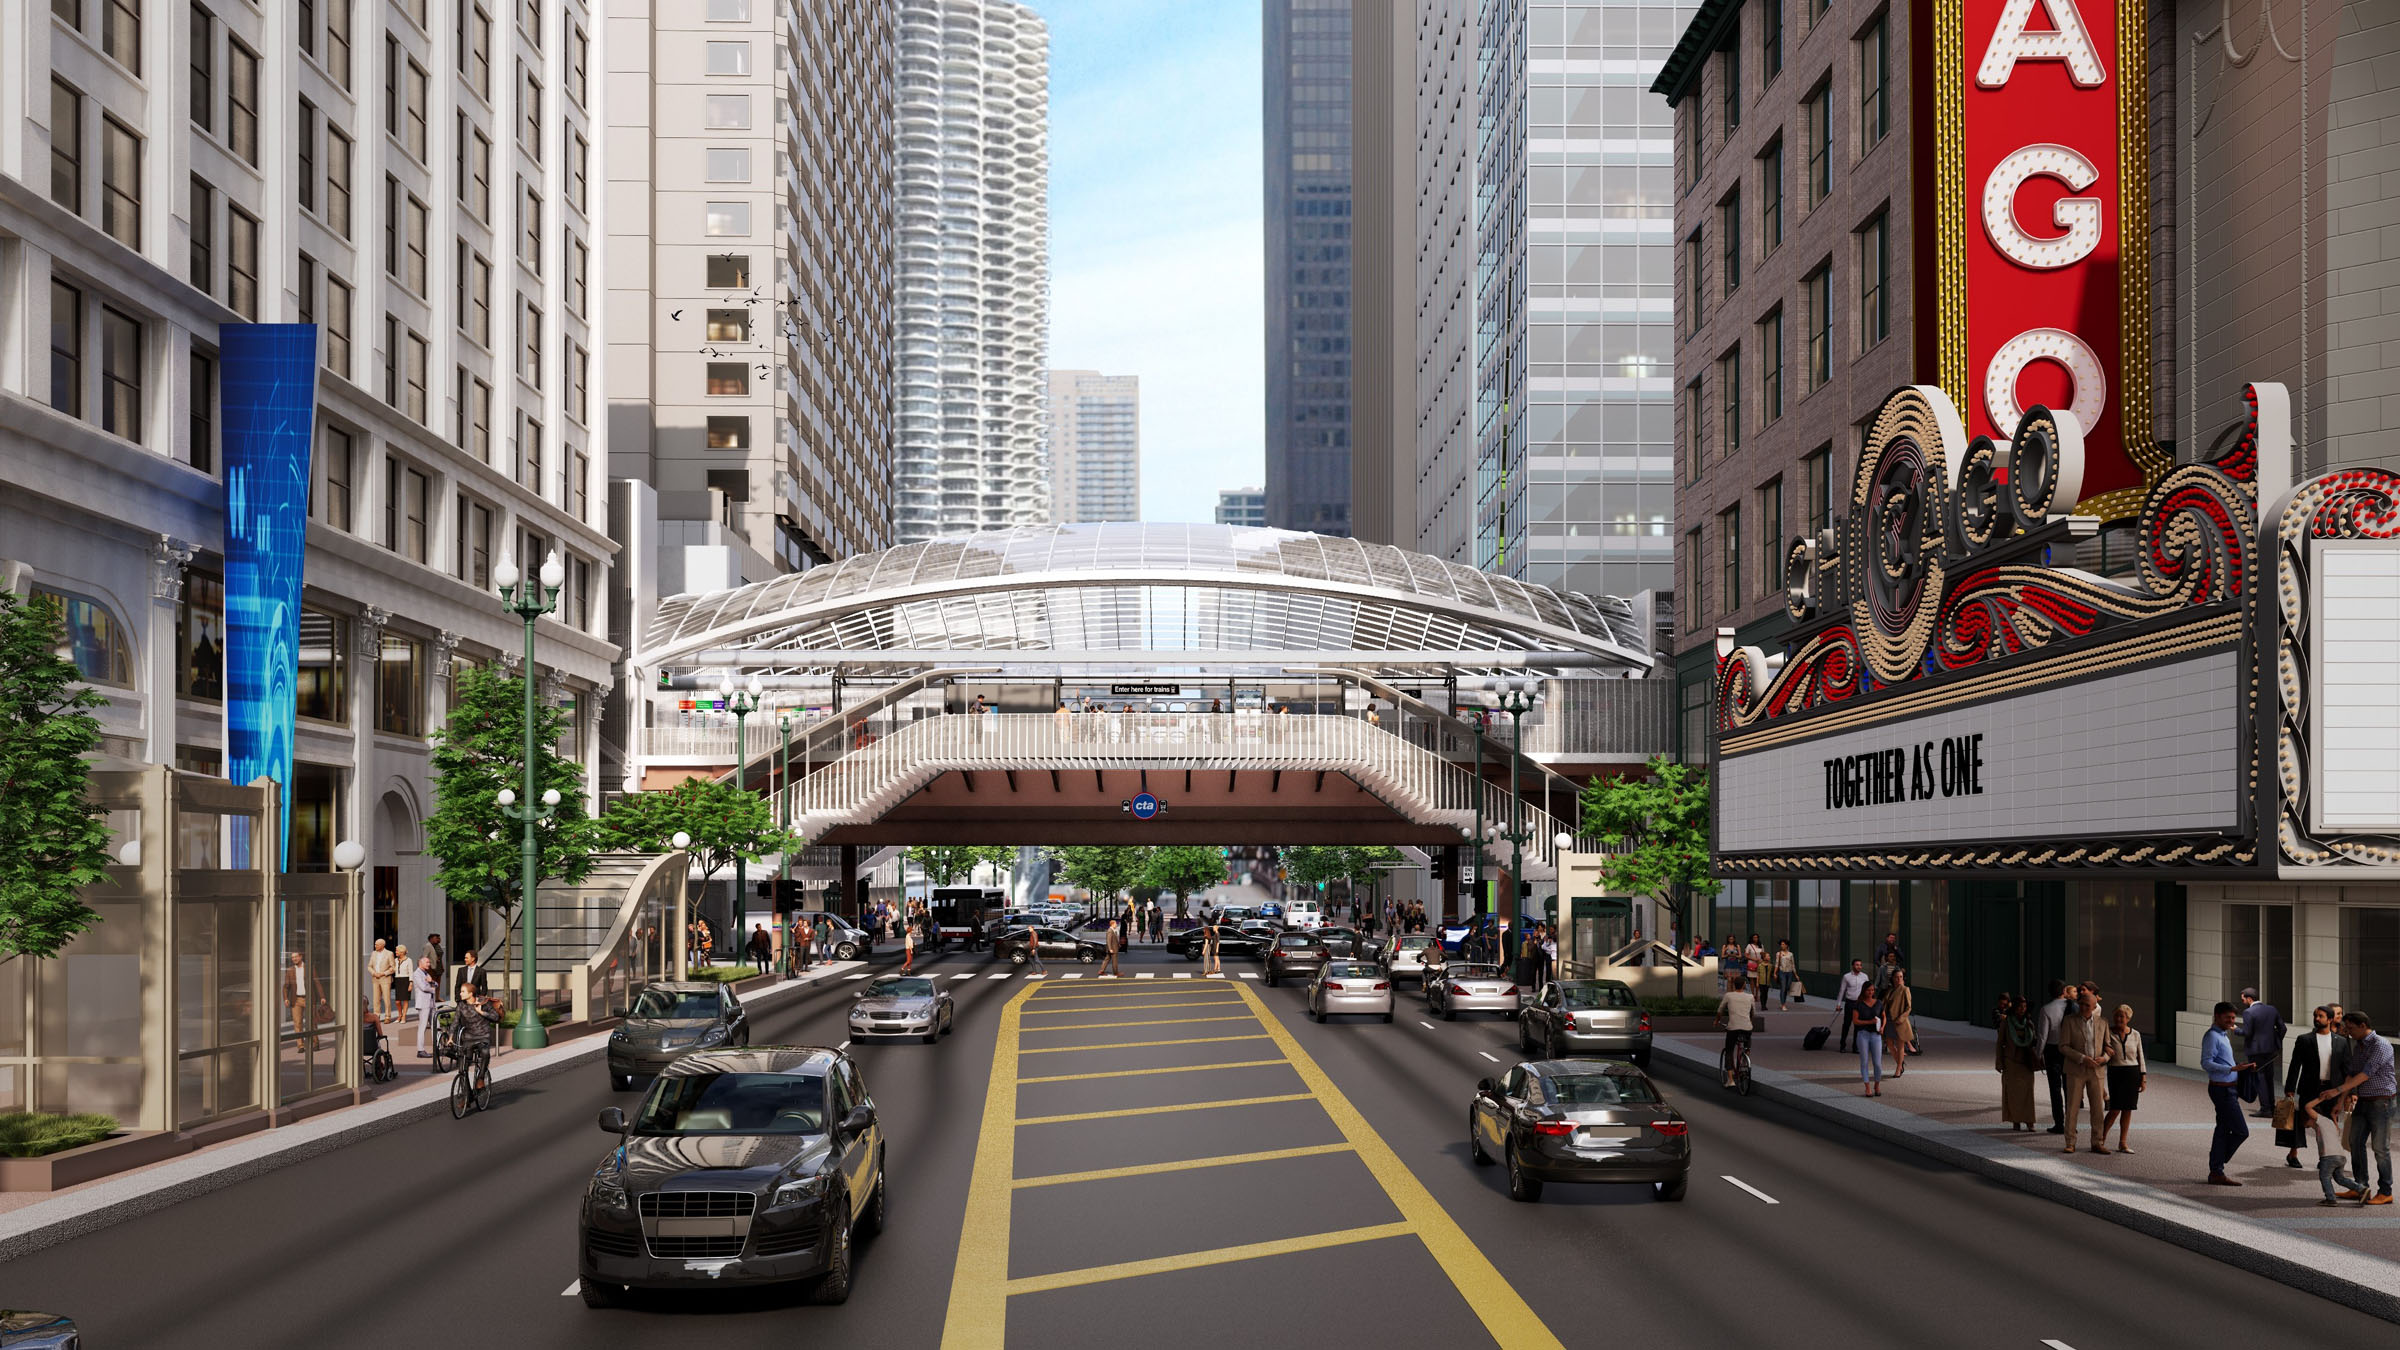 State and Lake CTA station designed by Transystems SOM rendering courtesy of CDOT